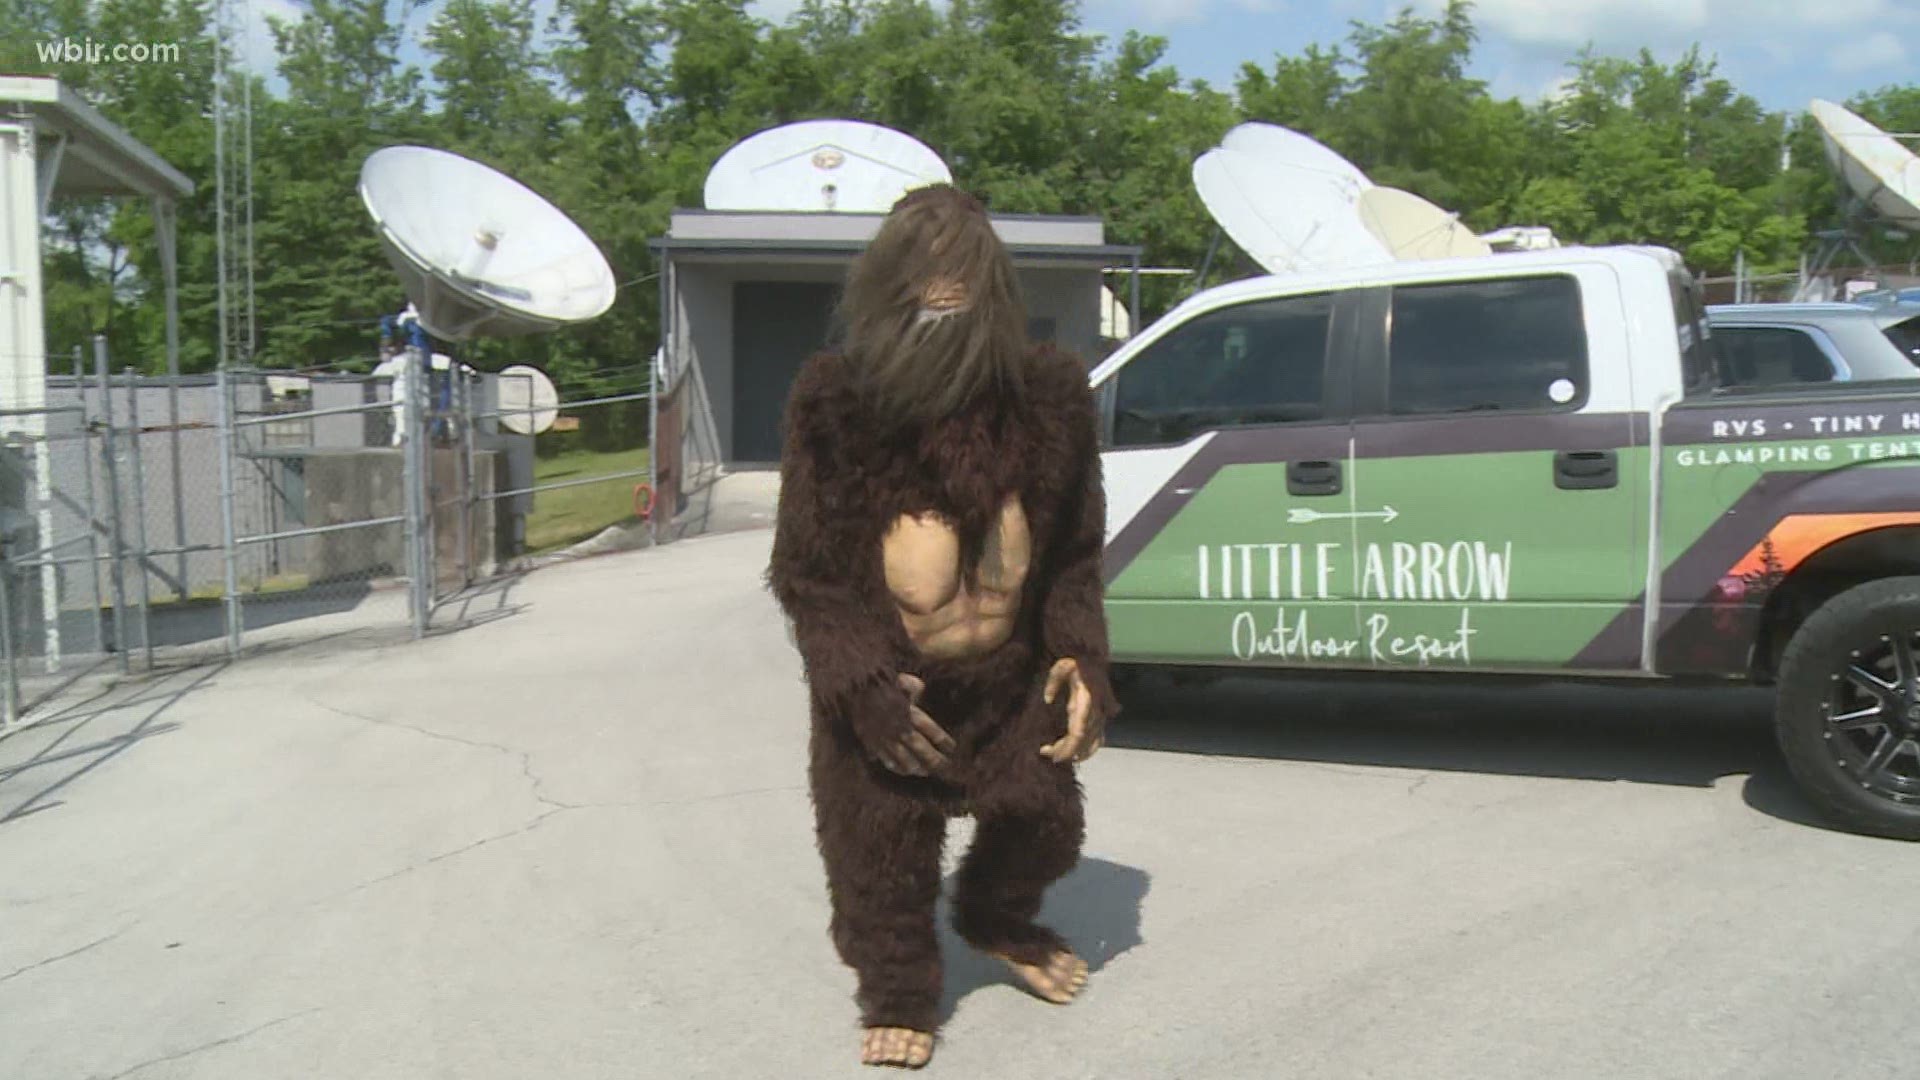 The Smoky Mountain Bigfoot Festival is May 22 in Townsend. For ticket information visit smokymountainbigfootfestival.com. May 19, 2021-4pm.